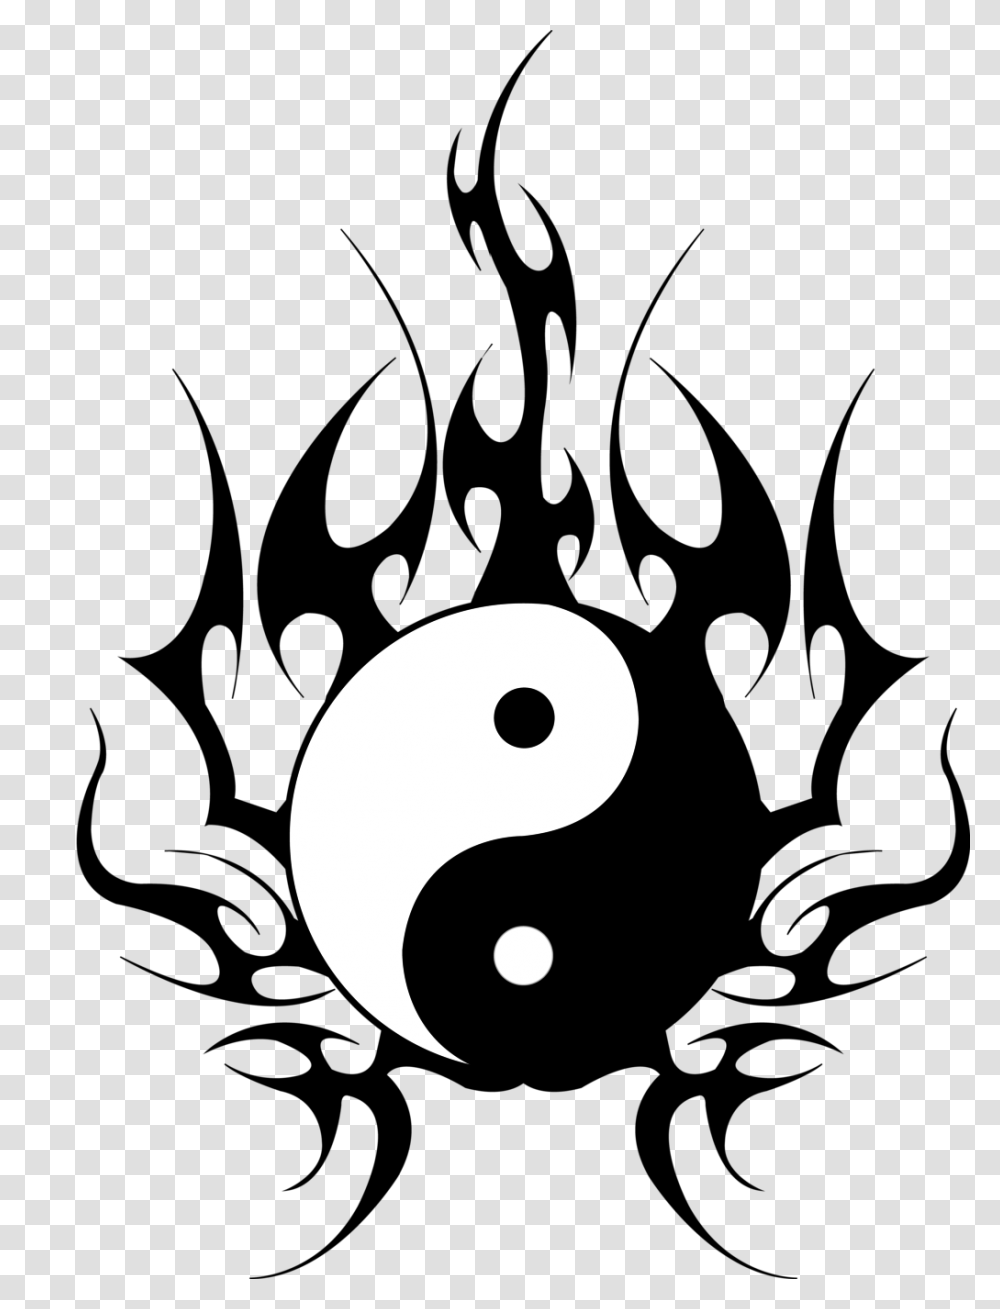 Ying Yang Tattoo Flames, Moon, Outer Space, Night, Astronomy Transparent Png